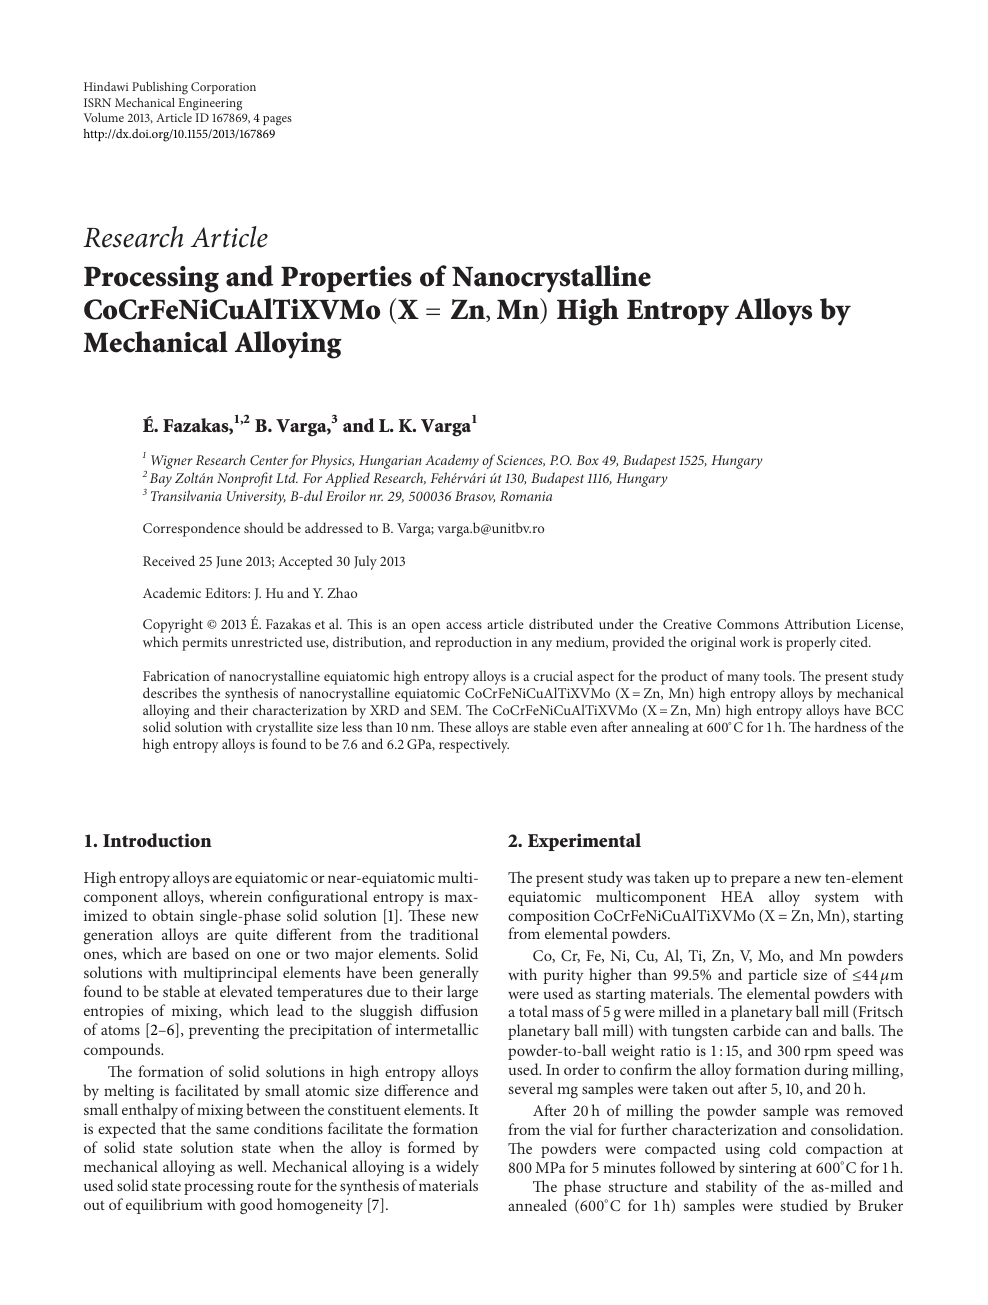 Processing And Properties Of Nanocrystalline Cocrfenicualtixvmo X Zn Mn High Entropy Alloys By Mechanical Alloying Topic Of Research Paper In Mechanical Engineering Download Scholarly Article Pdf And